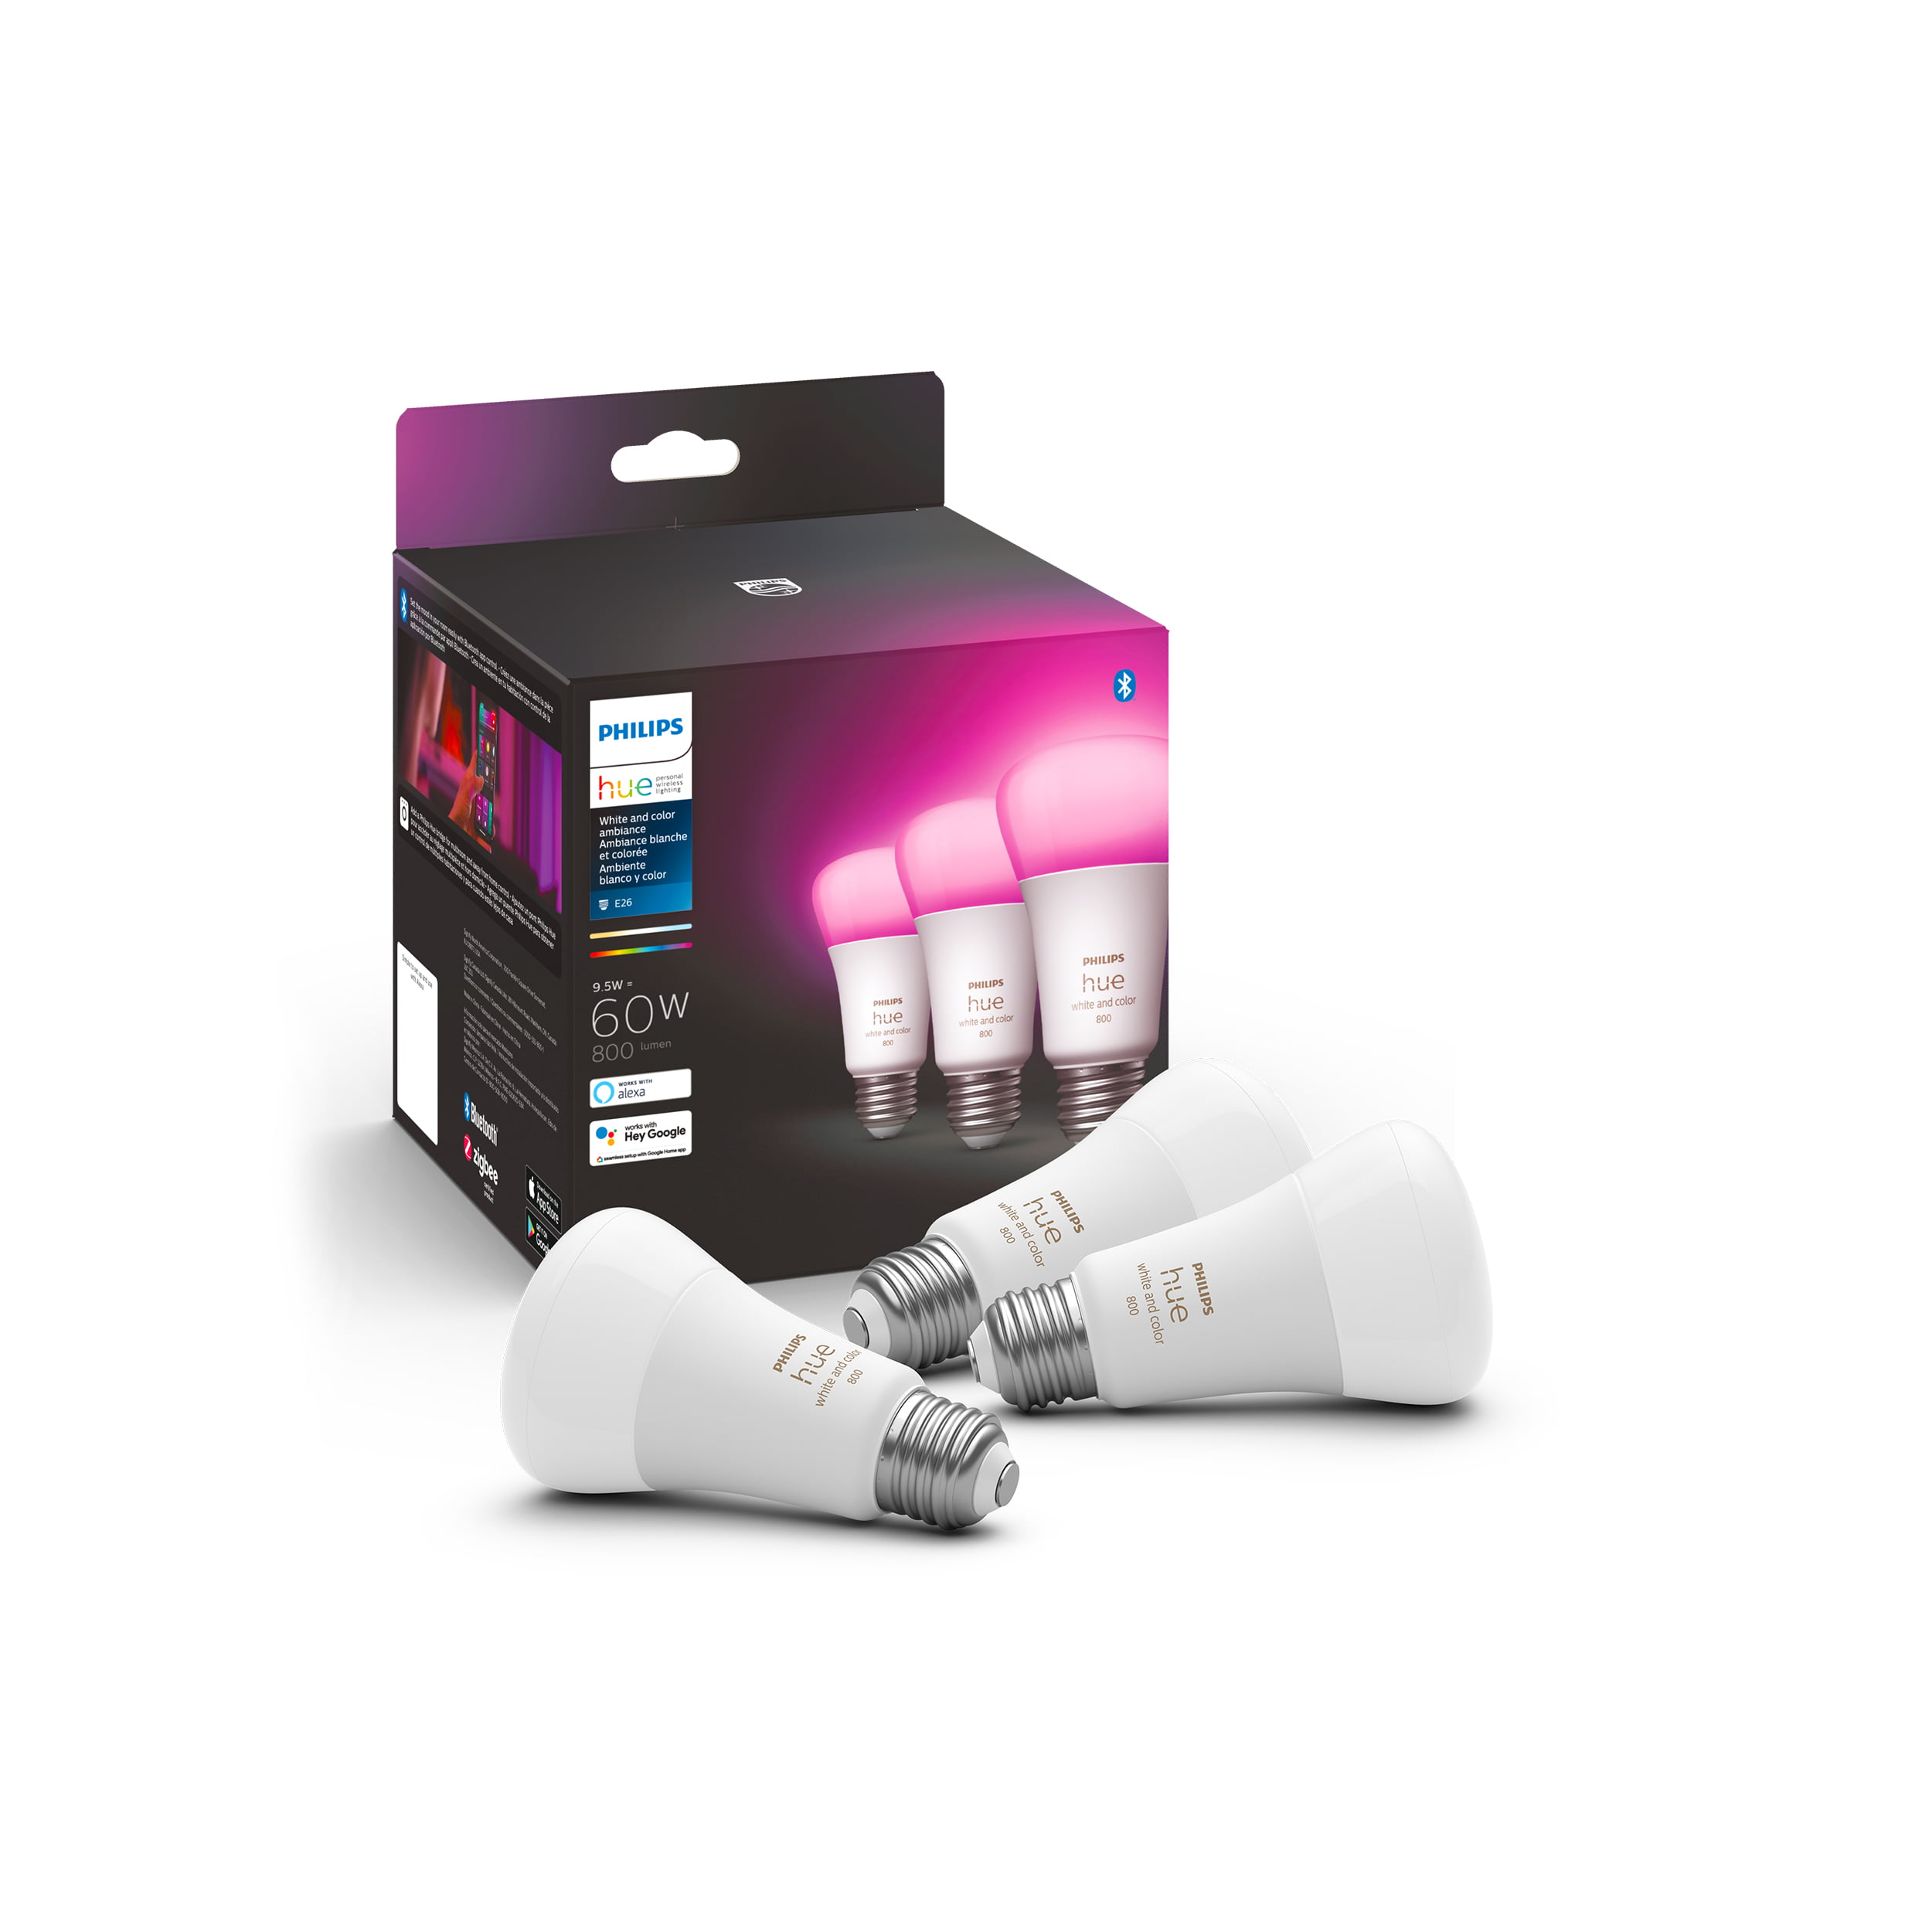 Hue 3-Pack White and Color Ambiance A19 Bluetooth LED Smart Bulbs, Multicolored - Walmart.com